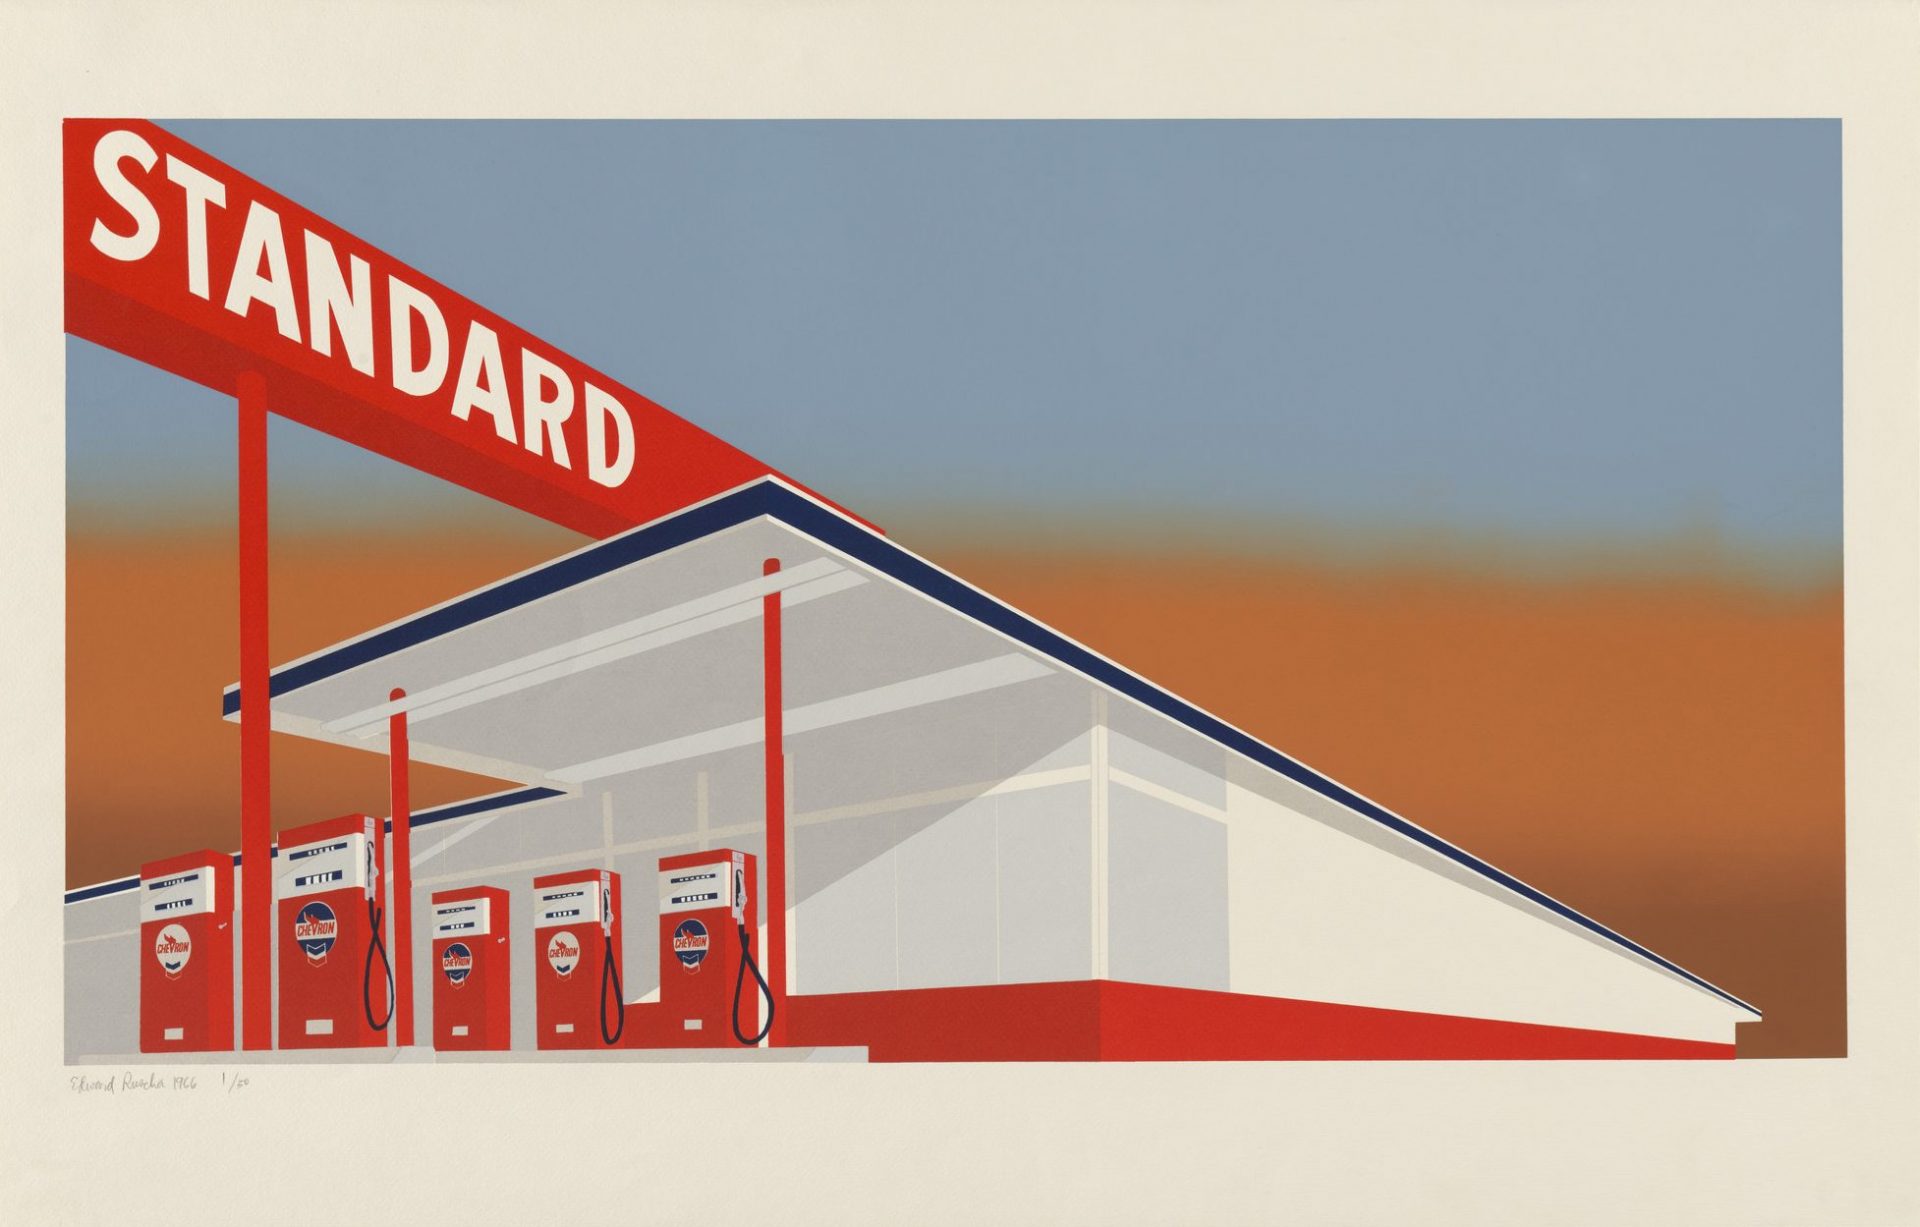 Screenprint artwork by Edward Ruscha features the iconic image of a “Standard” brand gas station. The mid-century modern architecture of the station is dramatically foreshortened with a sharp perspective making it appear to loom over the viewer. Positioned against a bold, flat evening sky with blended colors transitioning from deep inky blue to burnt orange, the angular lines and bright colors capture a typical American roadside scene from the 1960s.